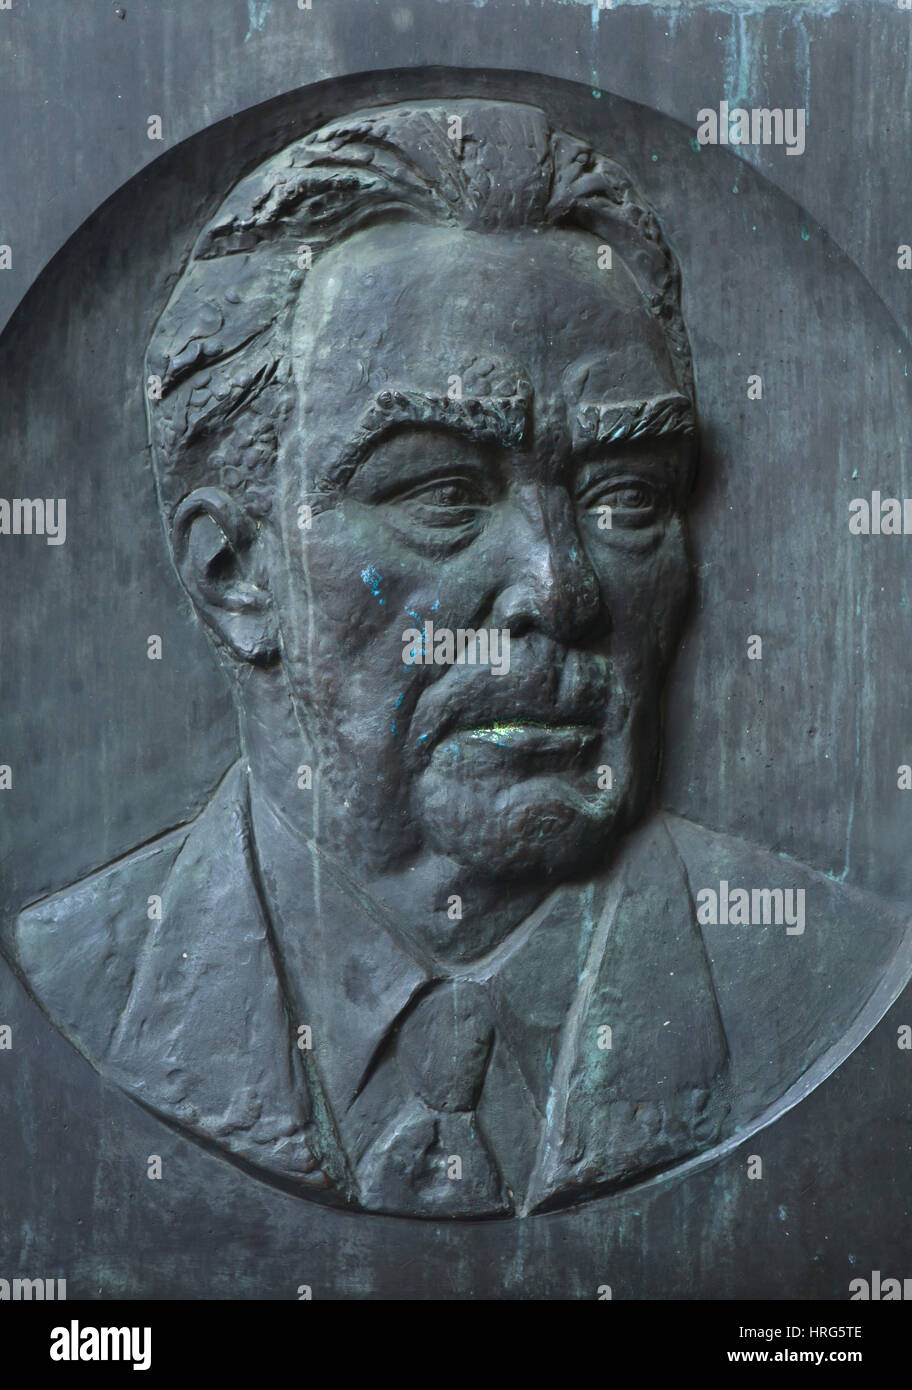 Soviet leader Leonid Brezhnev depicted in the commemorative plaque displayed next to the entrance to the Mauermuseum (Berlin Wall Museum) in Berlin, Germany. The plaque designed by Soviet sculptor Yulian Rukavishnikov (1982) once was installed on the house in Kutuzovsky Avenue in Moscow, Russia, where Leonid Brezhnev lived from 1952 to 1982. After the collapse of the Communist regime in the USSR, the plaque was presented to the Mauermuseum. Stock Photo